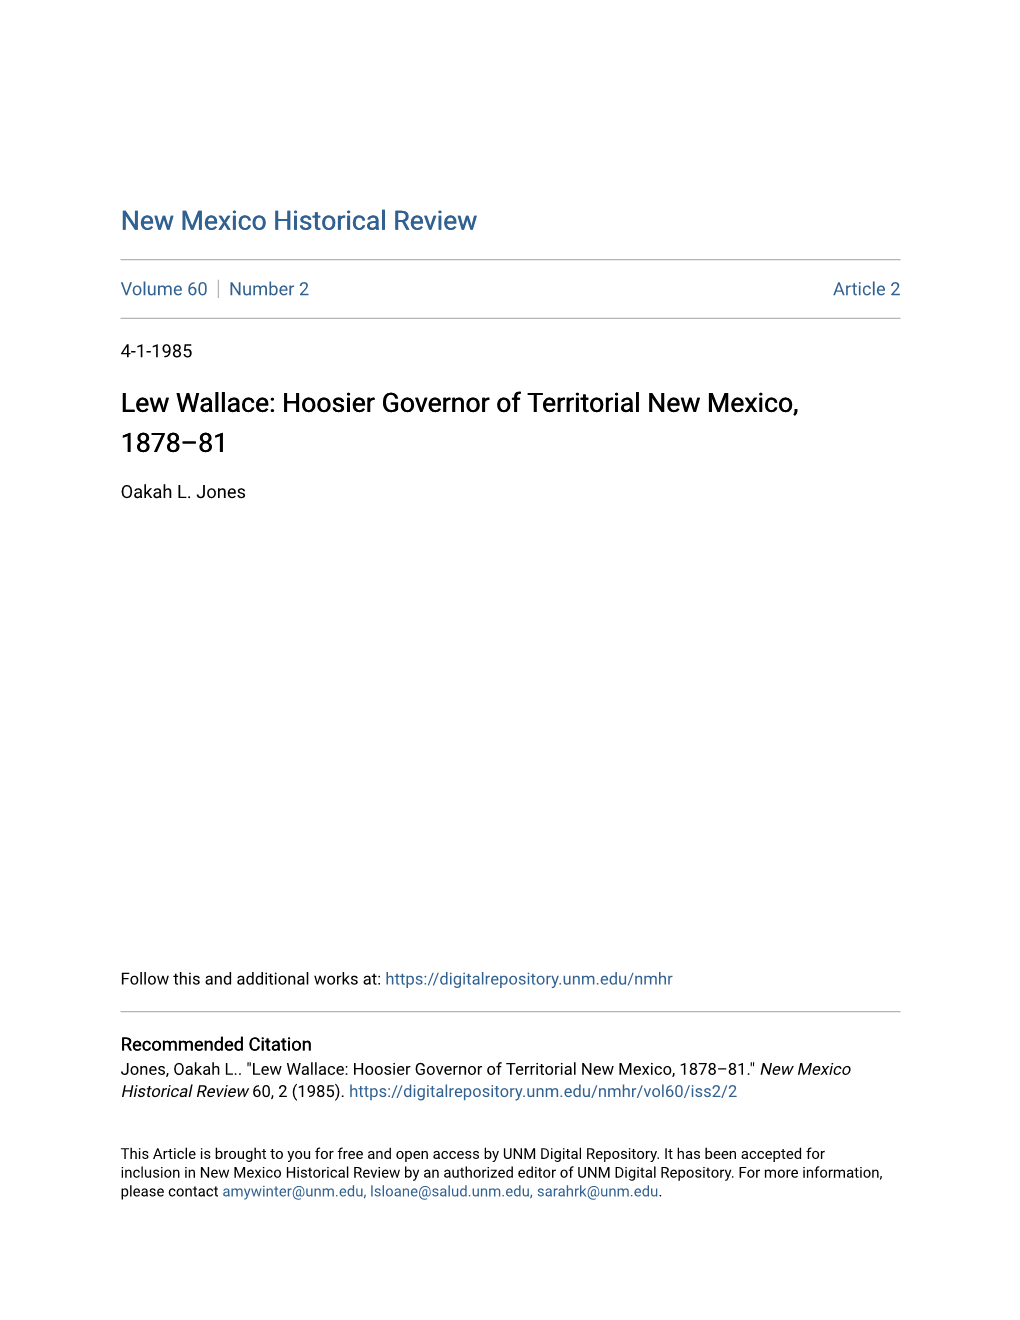 Lew Wallace: Hoosier Governor of Territorial New Mexico, 1878–81